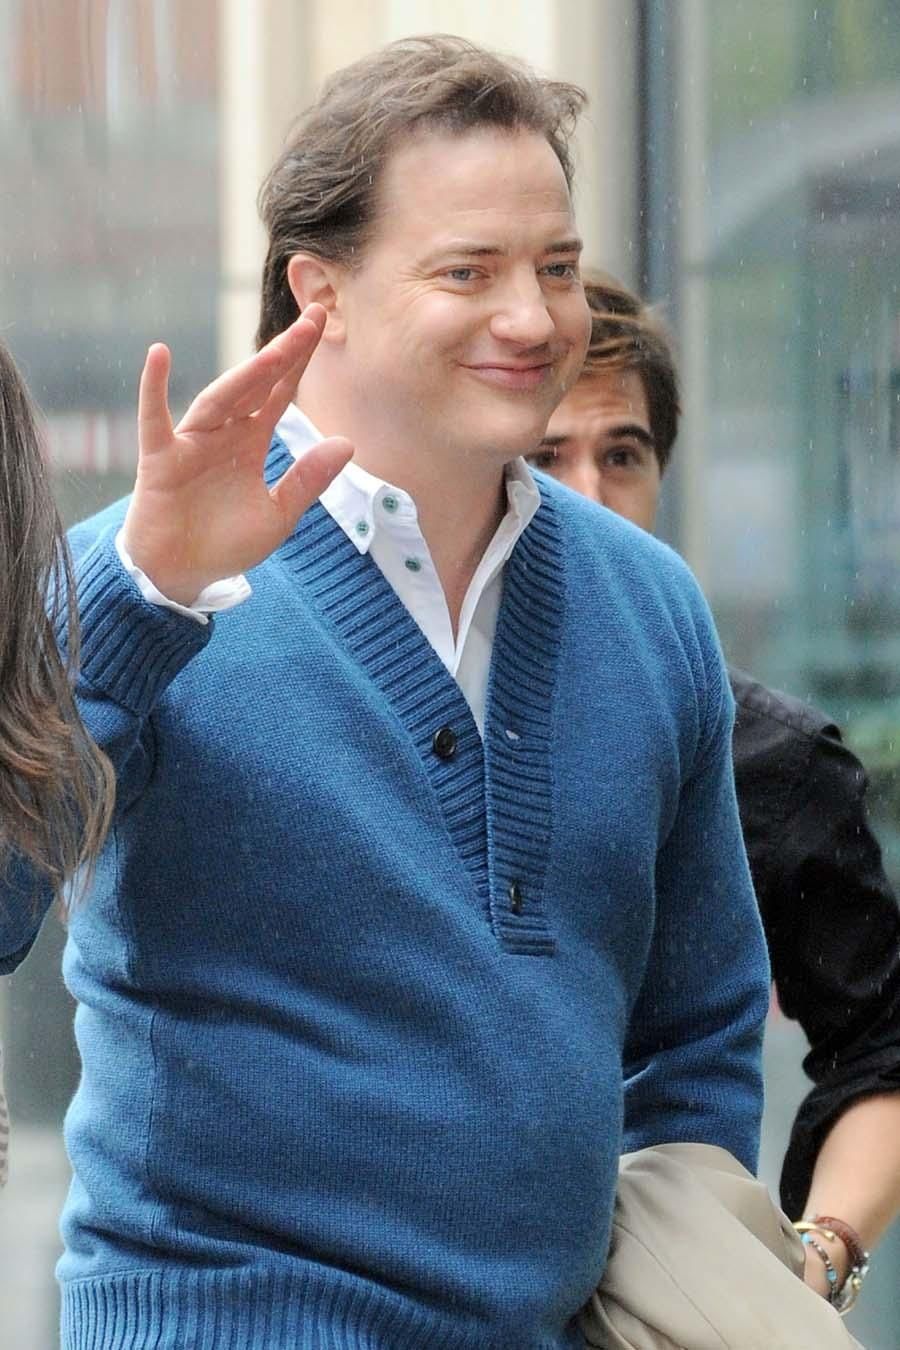 Where Has Brendan Fraser Gone And Is He Alright